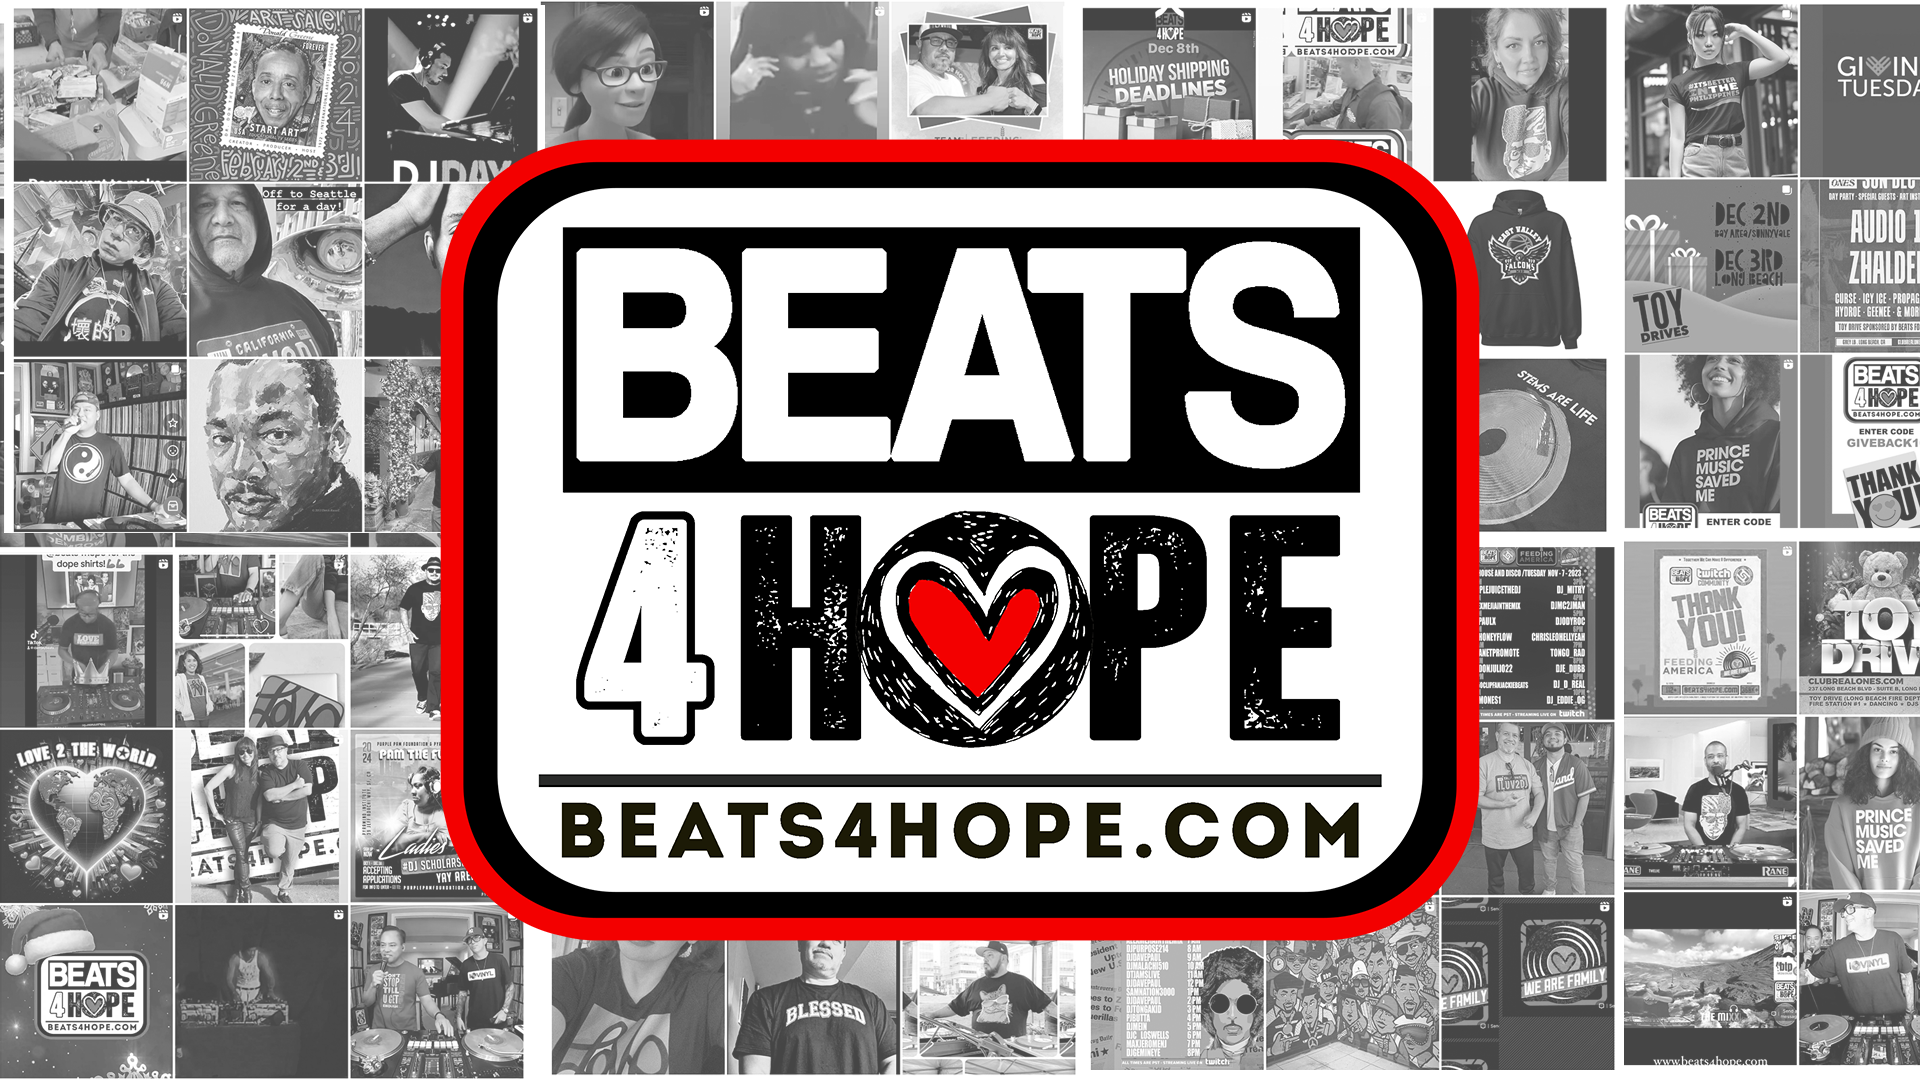 Beats 4 Hope brings people and music together for social good